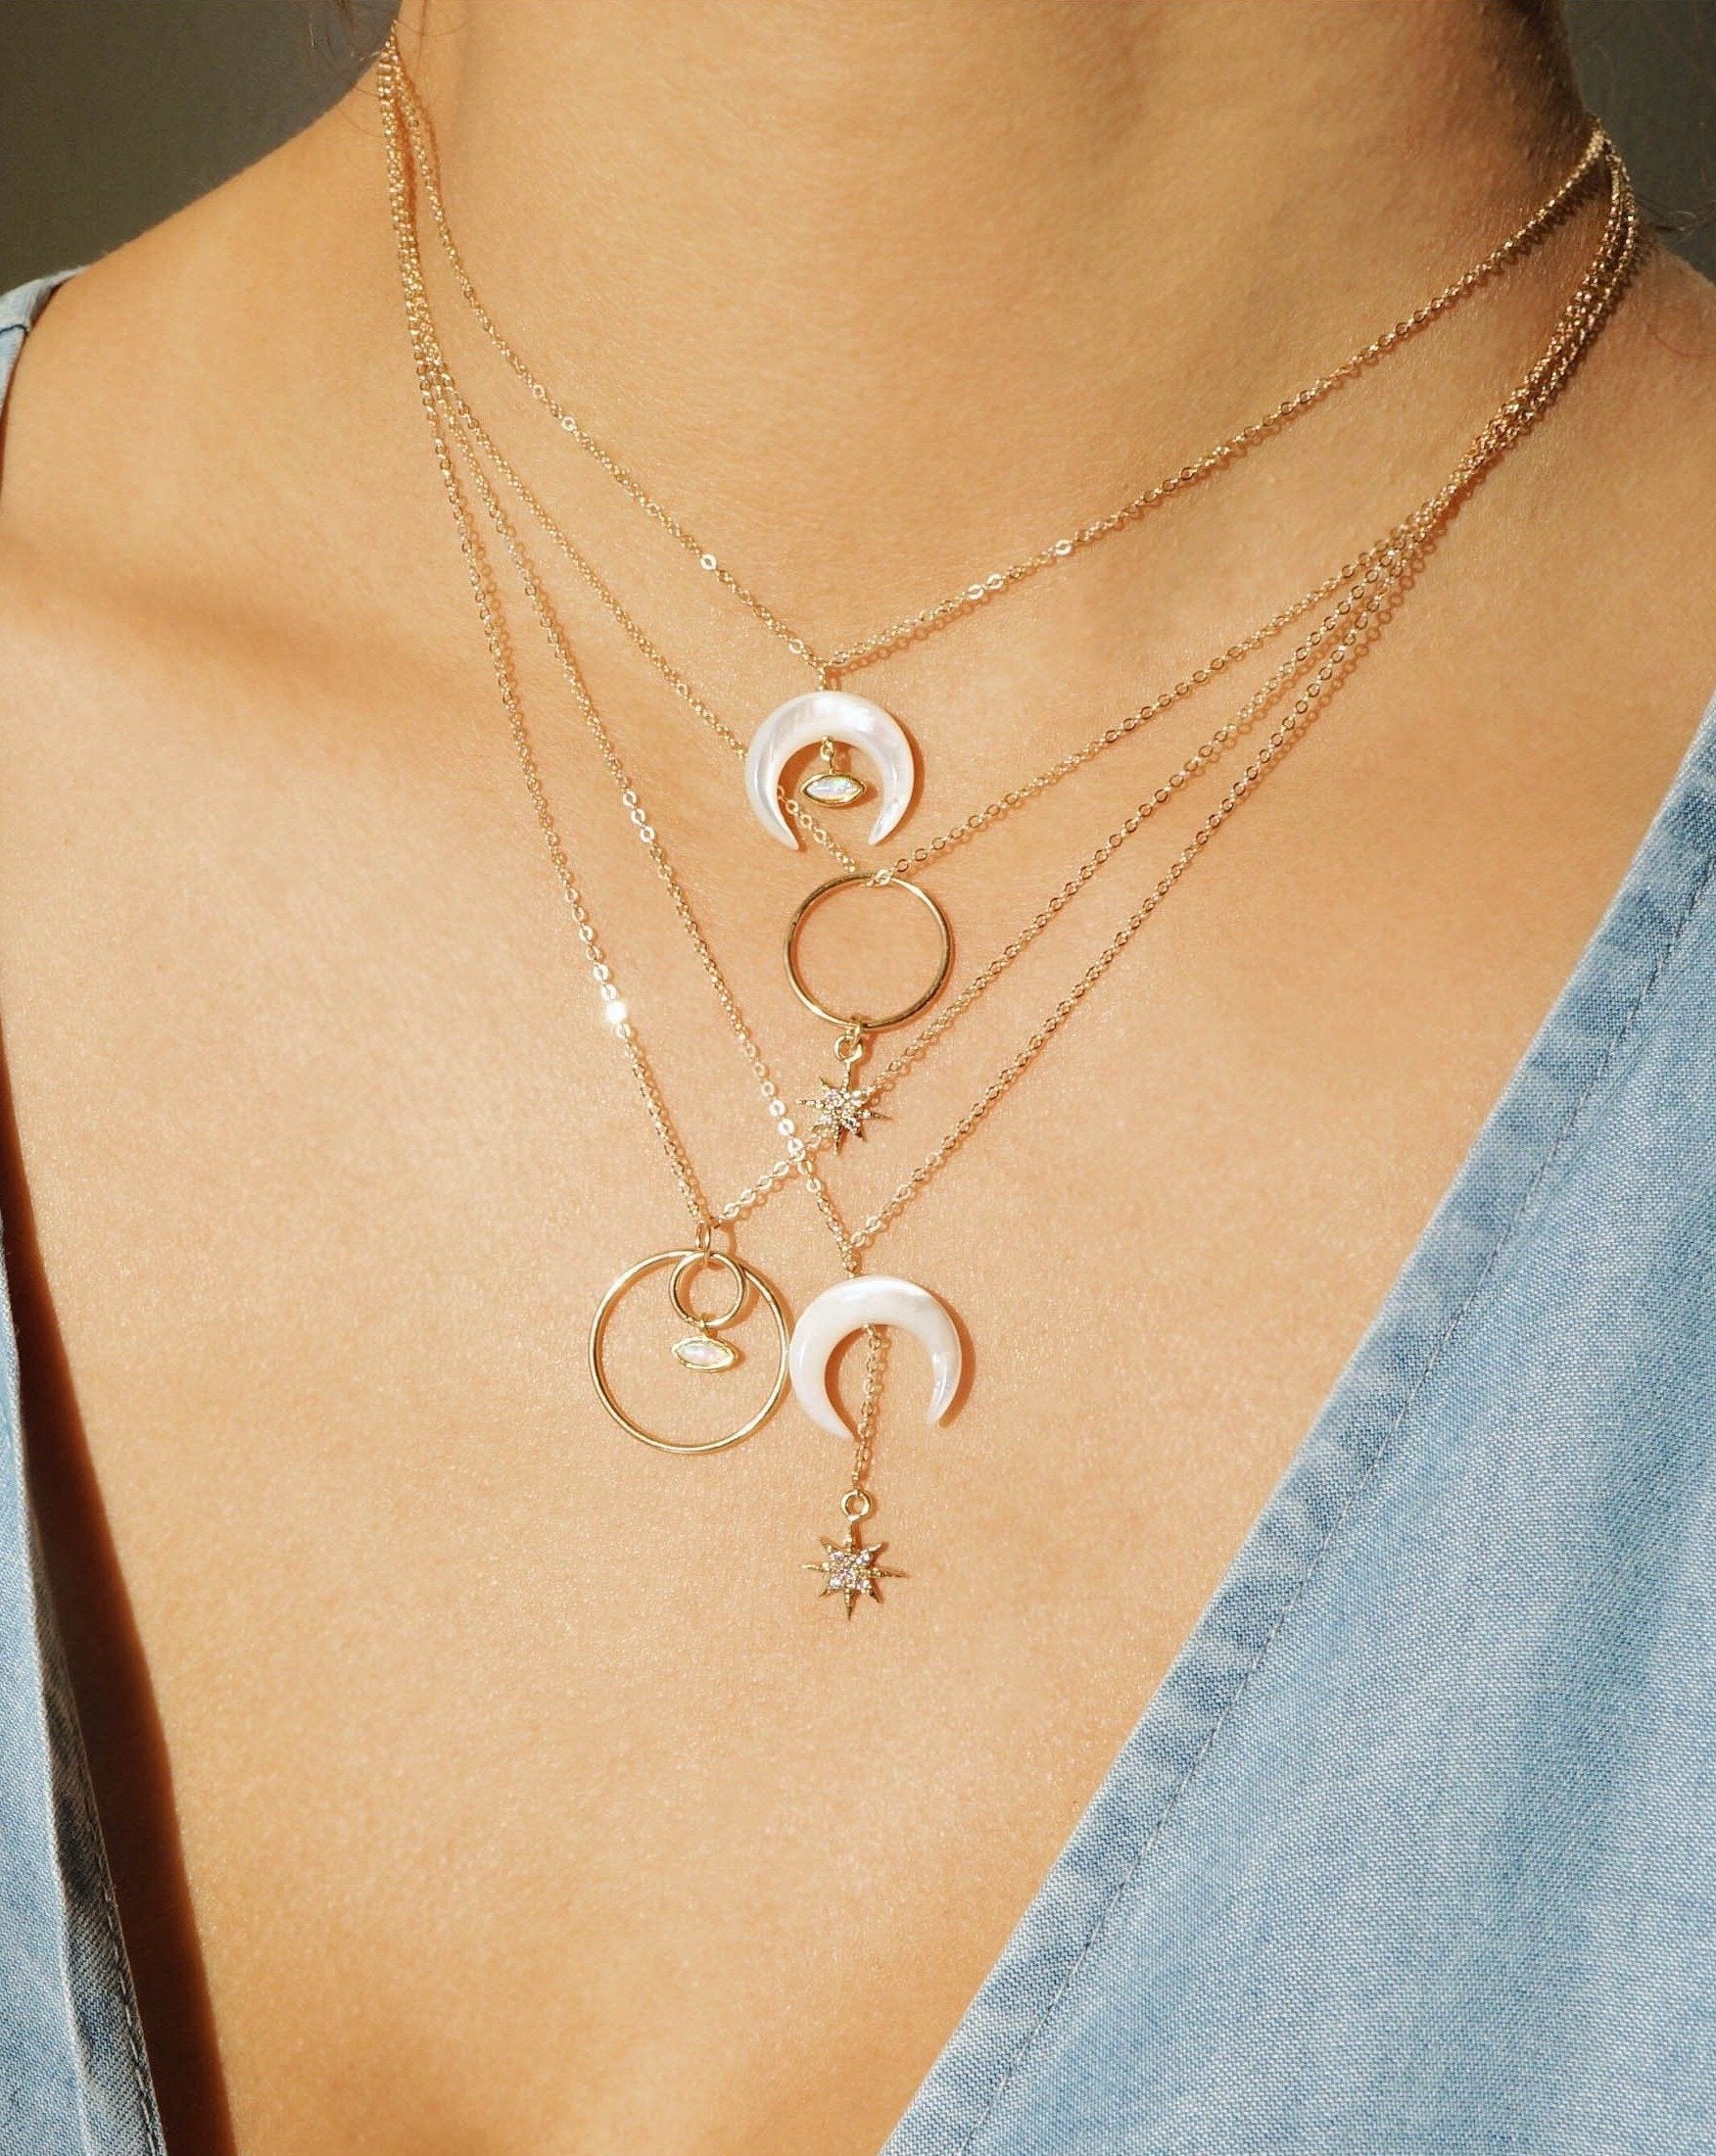 Brillar Necklace by KOZAKH. A 16 to 18 inch adjustable length necklace in 14K Gold Filled, featuring a Marquise Opal charm and a hand carved Mother of Pearl crescent moon charm.